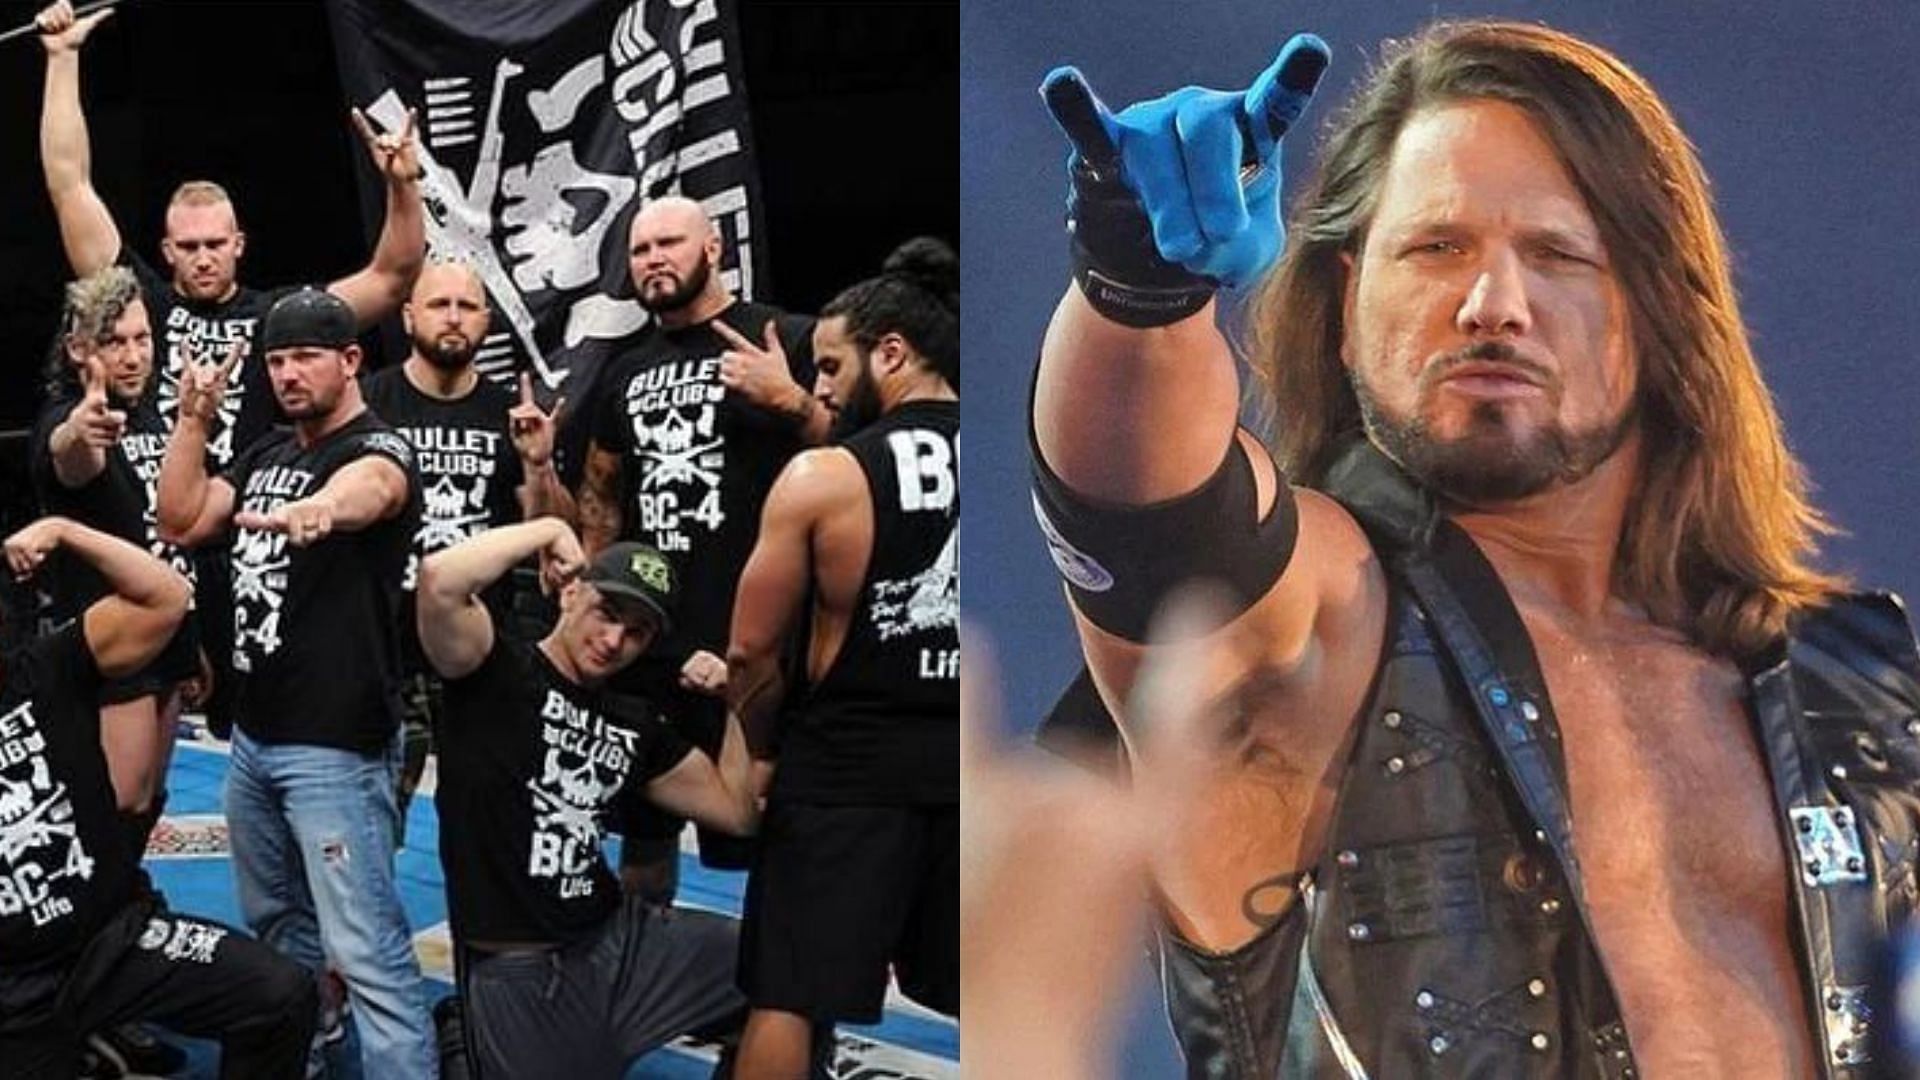 AJ Styles is a former member of the Bullet Club